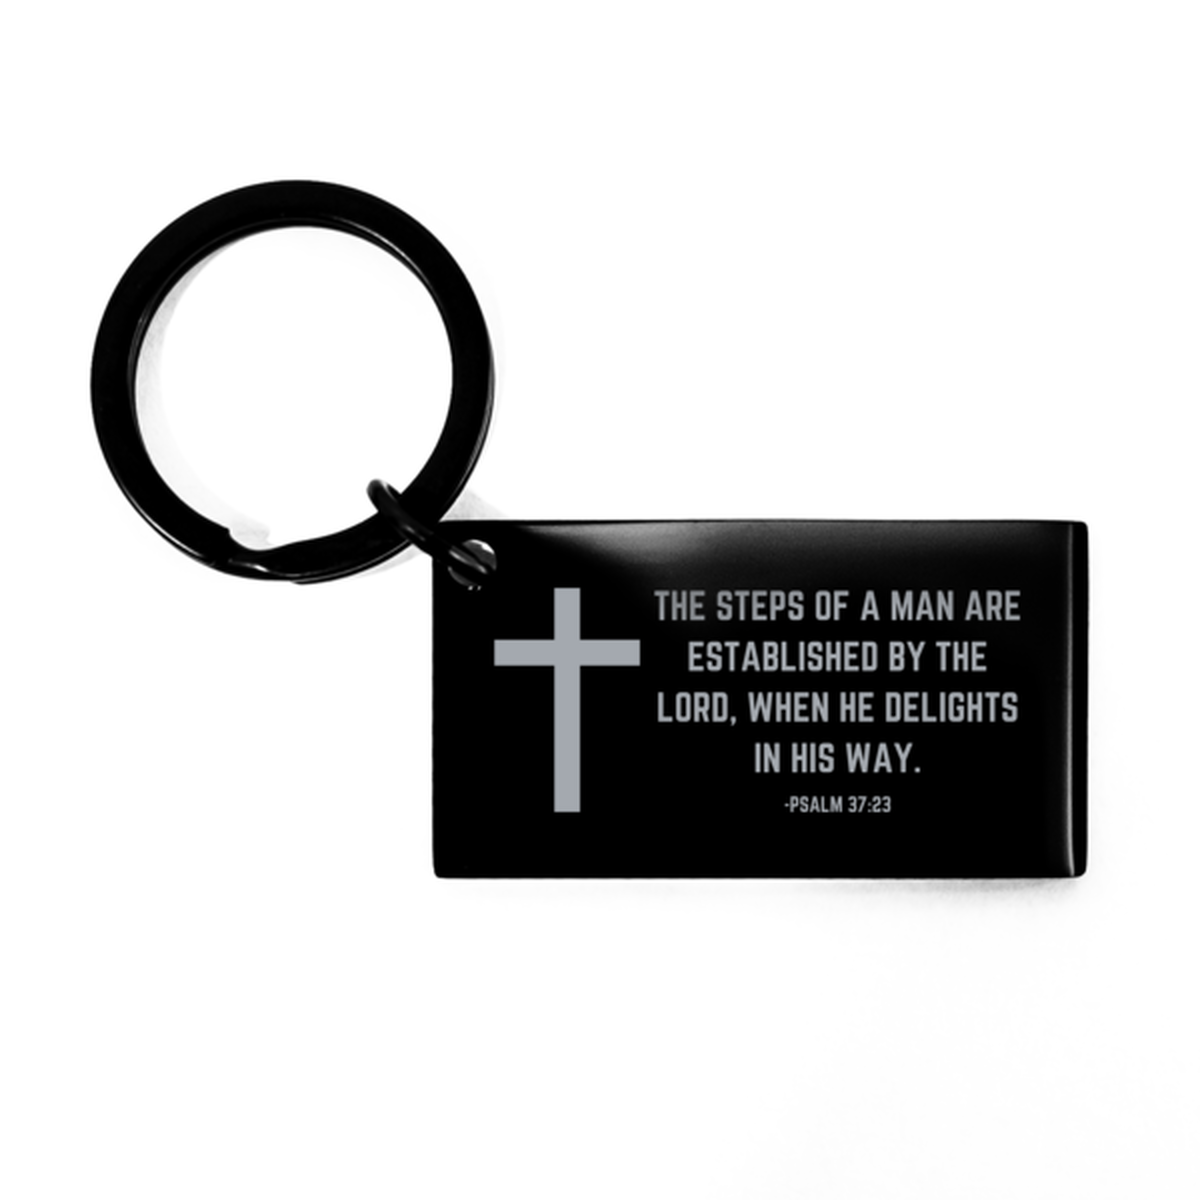 Baptism Gifts For Teenage Boys Girls, Christian Bible Verse Black Keychain, The steps of a man are, Confirmation Gifts, Bible Verse Keyring for Son, Godson, Grandson, Nephew